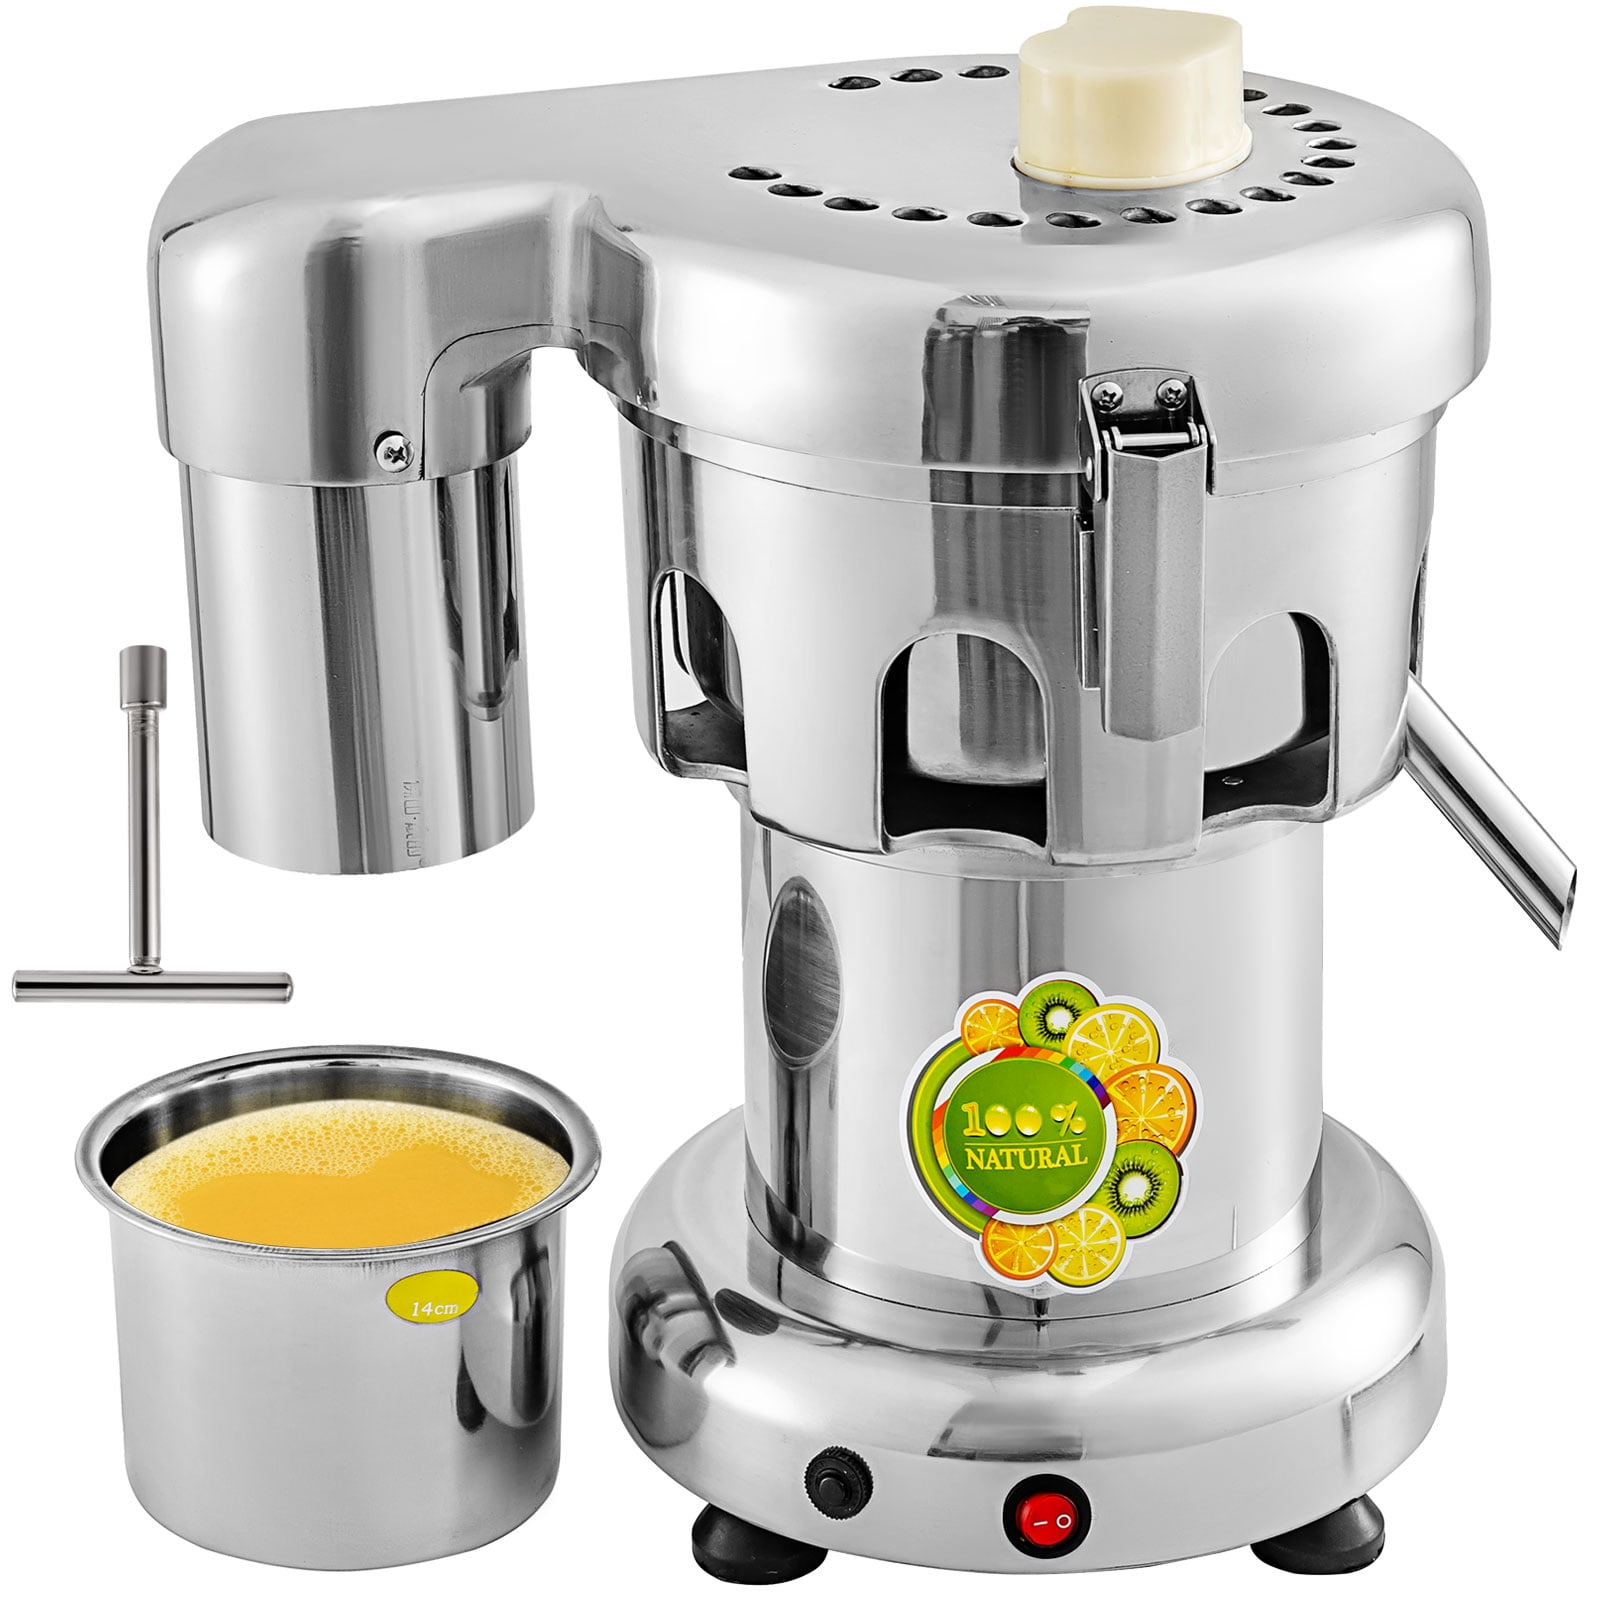 VEVOR Juicer Machine, 1000W Motor Centrifugal Juice Extractor, Easy Clean Centrifugal Juicers, Big Mouth Large 3 Feed Chute